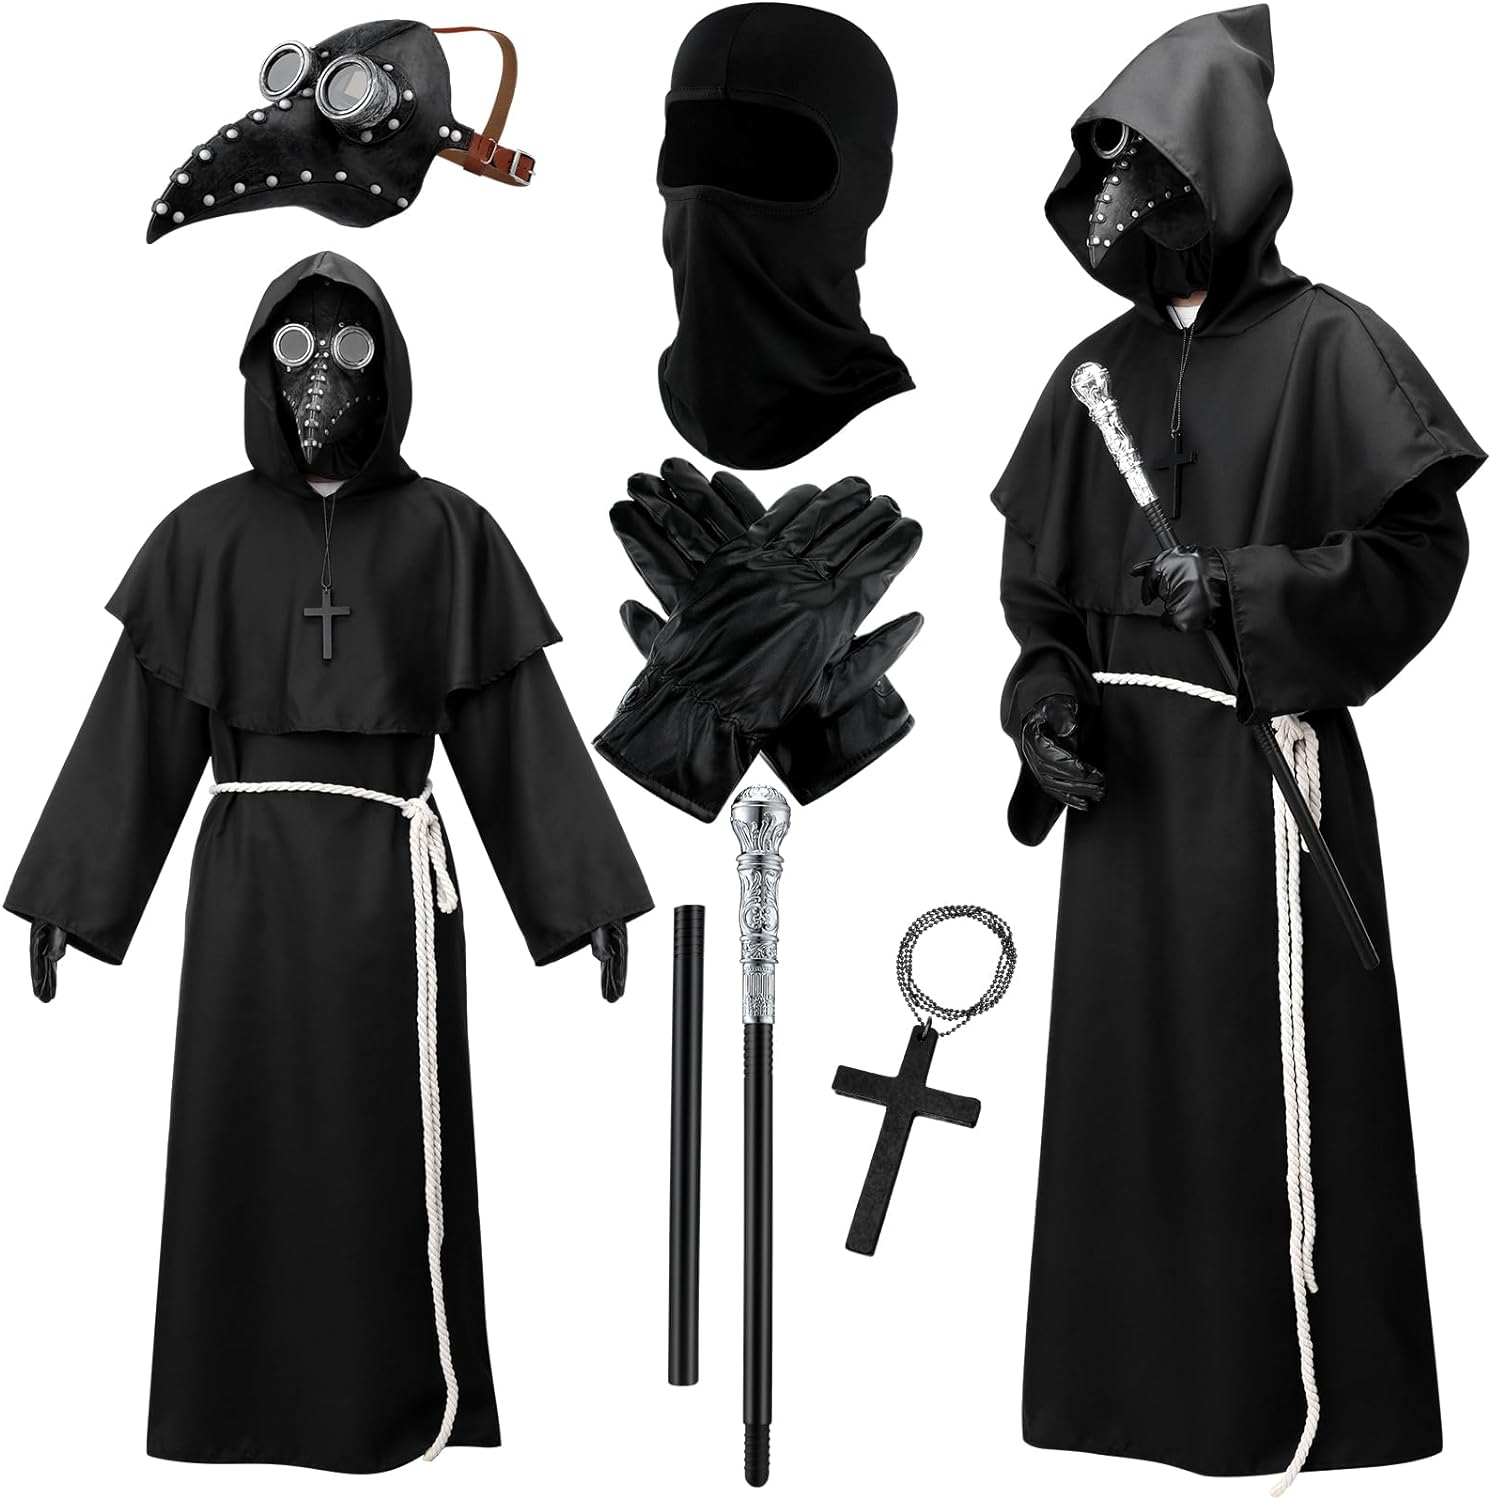 8 Pcs Plague Doctor Mask Costumes Set Balaclava Face Mask, Beak Ghost Mask, Monk Robe, Black Cane, White Rope, Hooded Cloak, Gloves and Cross Necklace for Halloween Cosplay